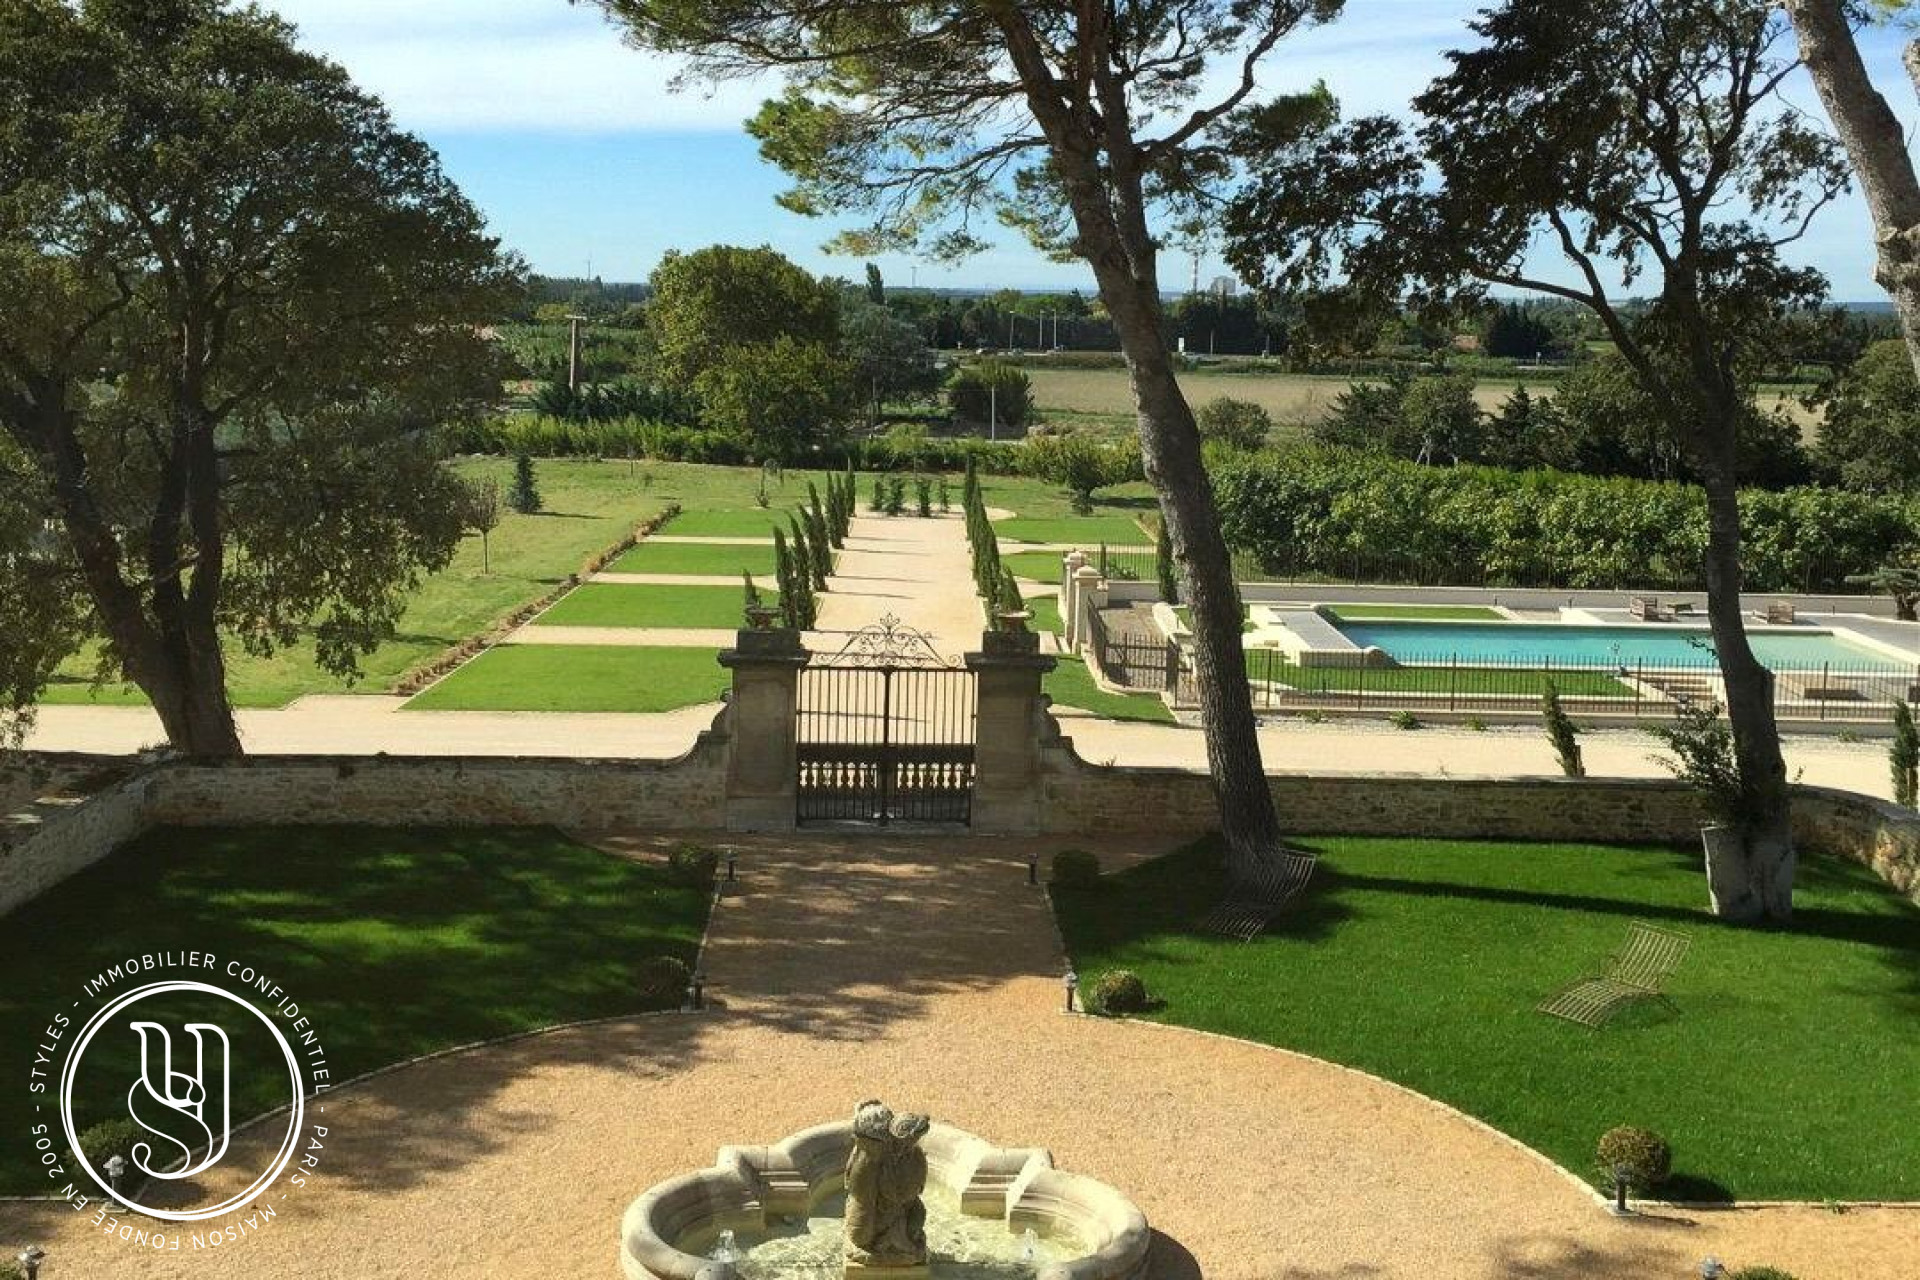 Saint-Rémy-de-Provence - nearby, a superb country house with a preserved character - image 3